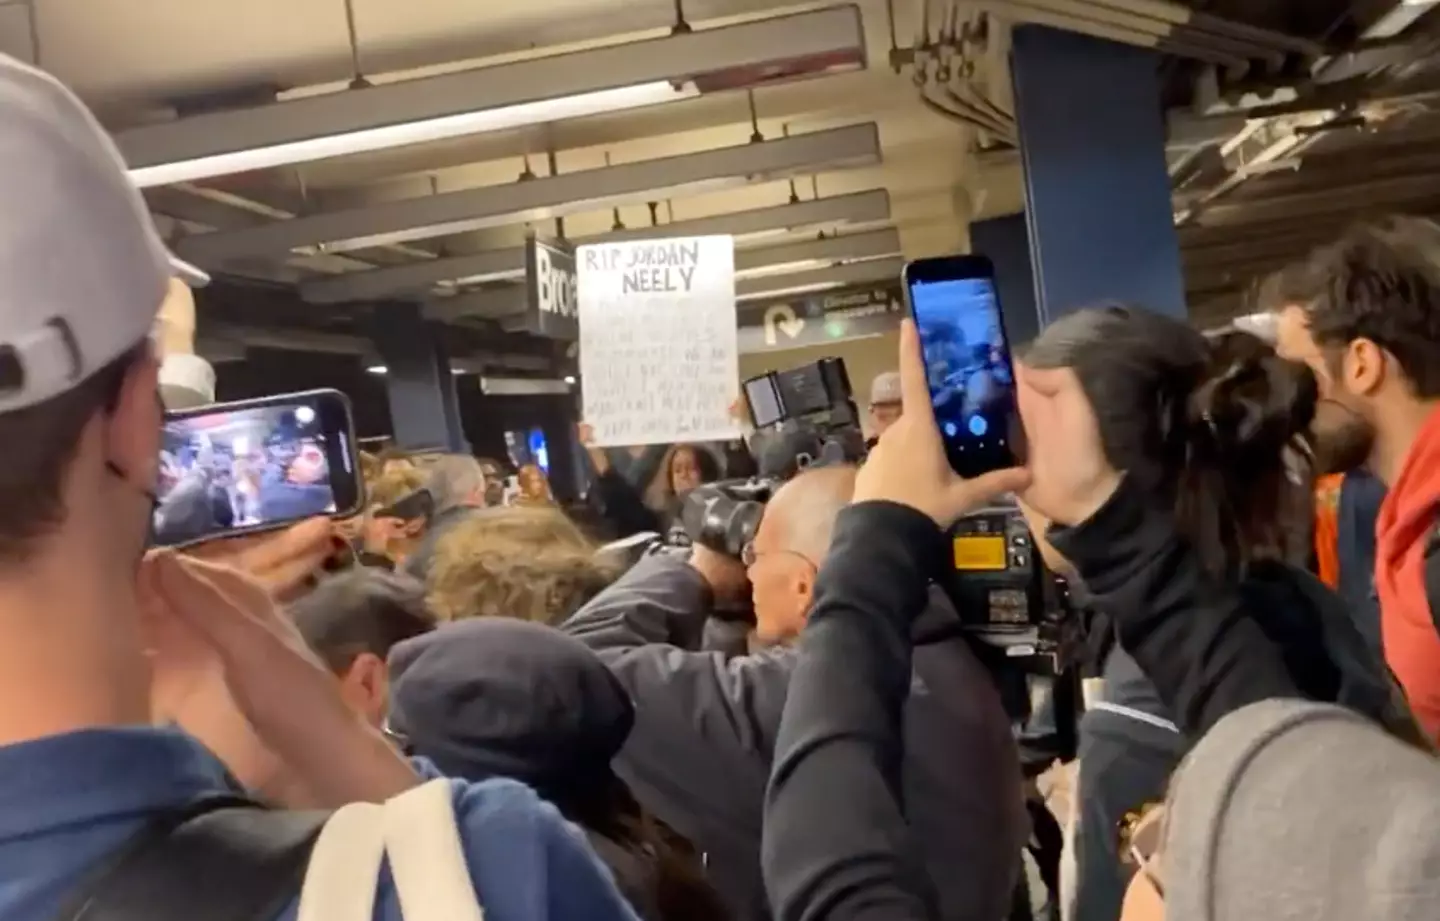 Protestors gathered at the subway station to protest Neely's death.